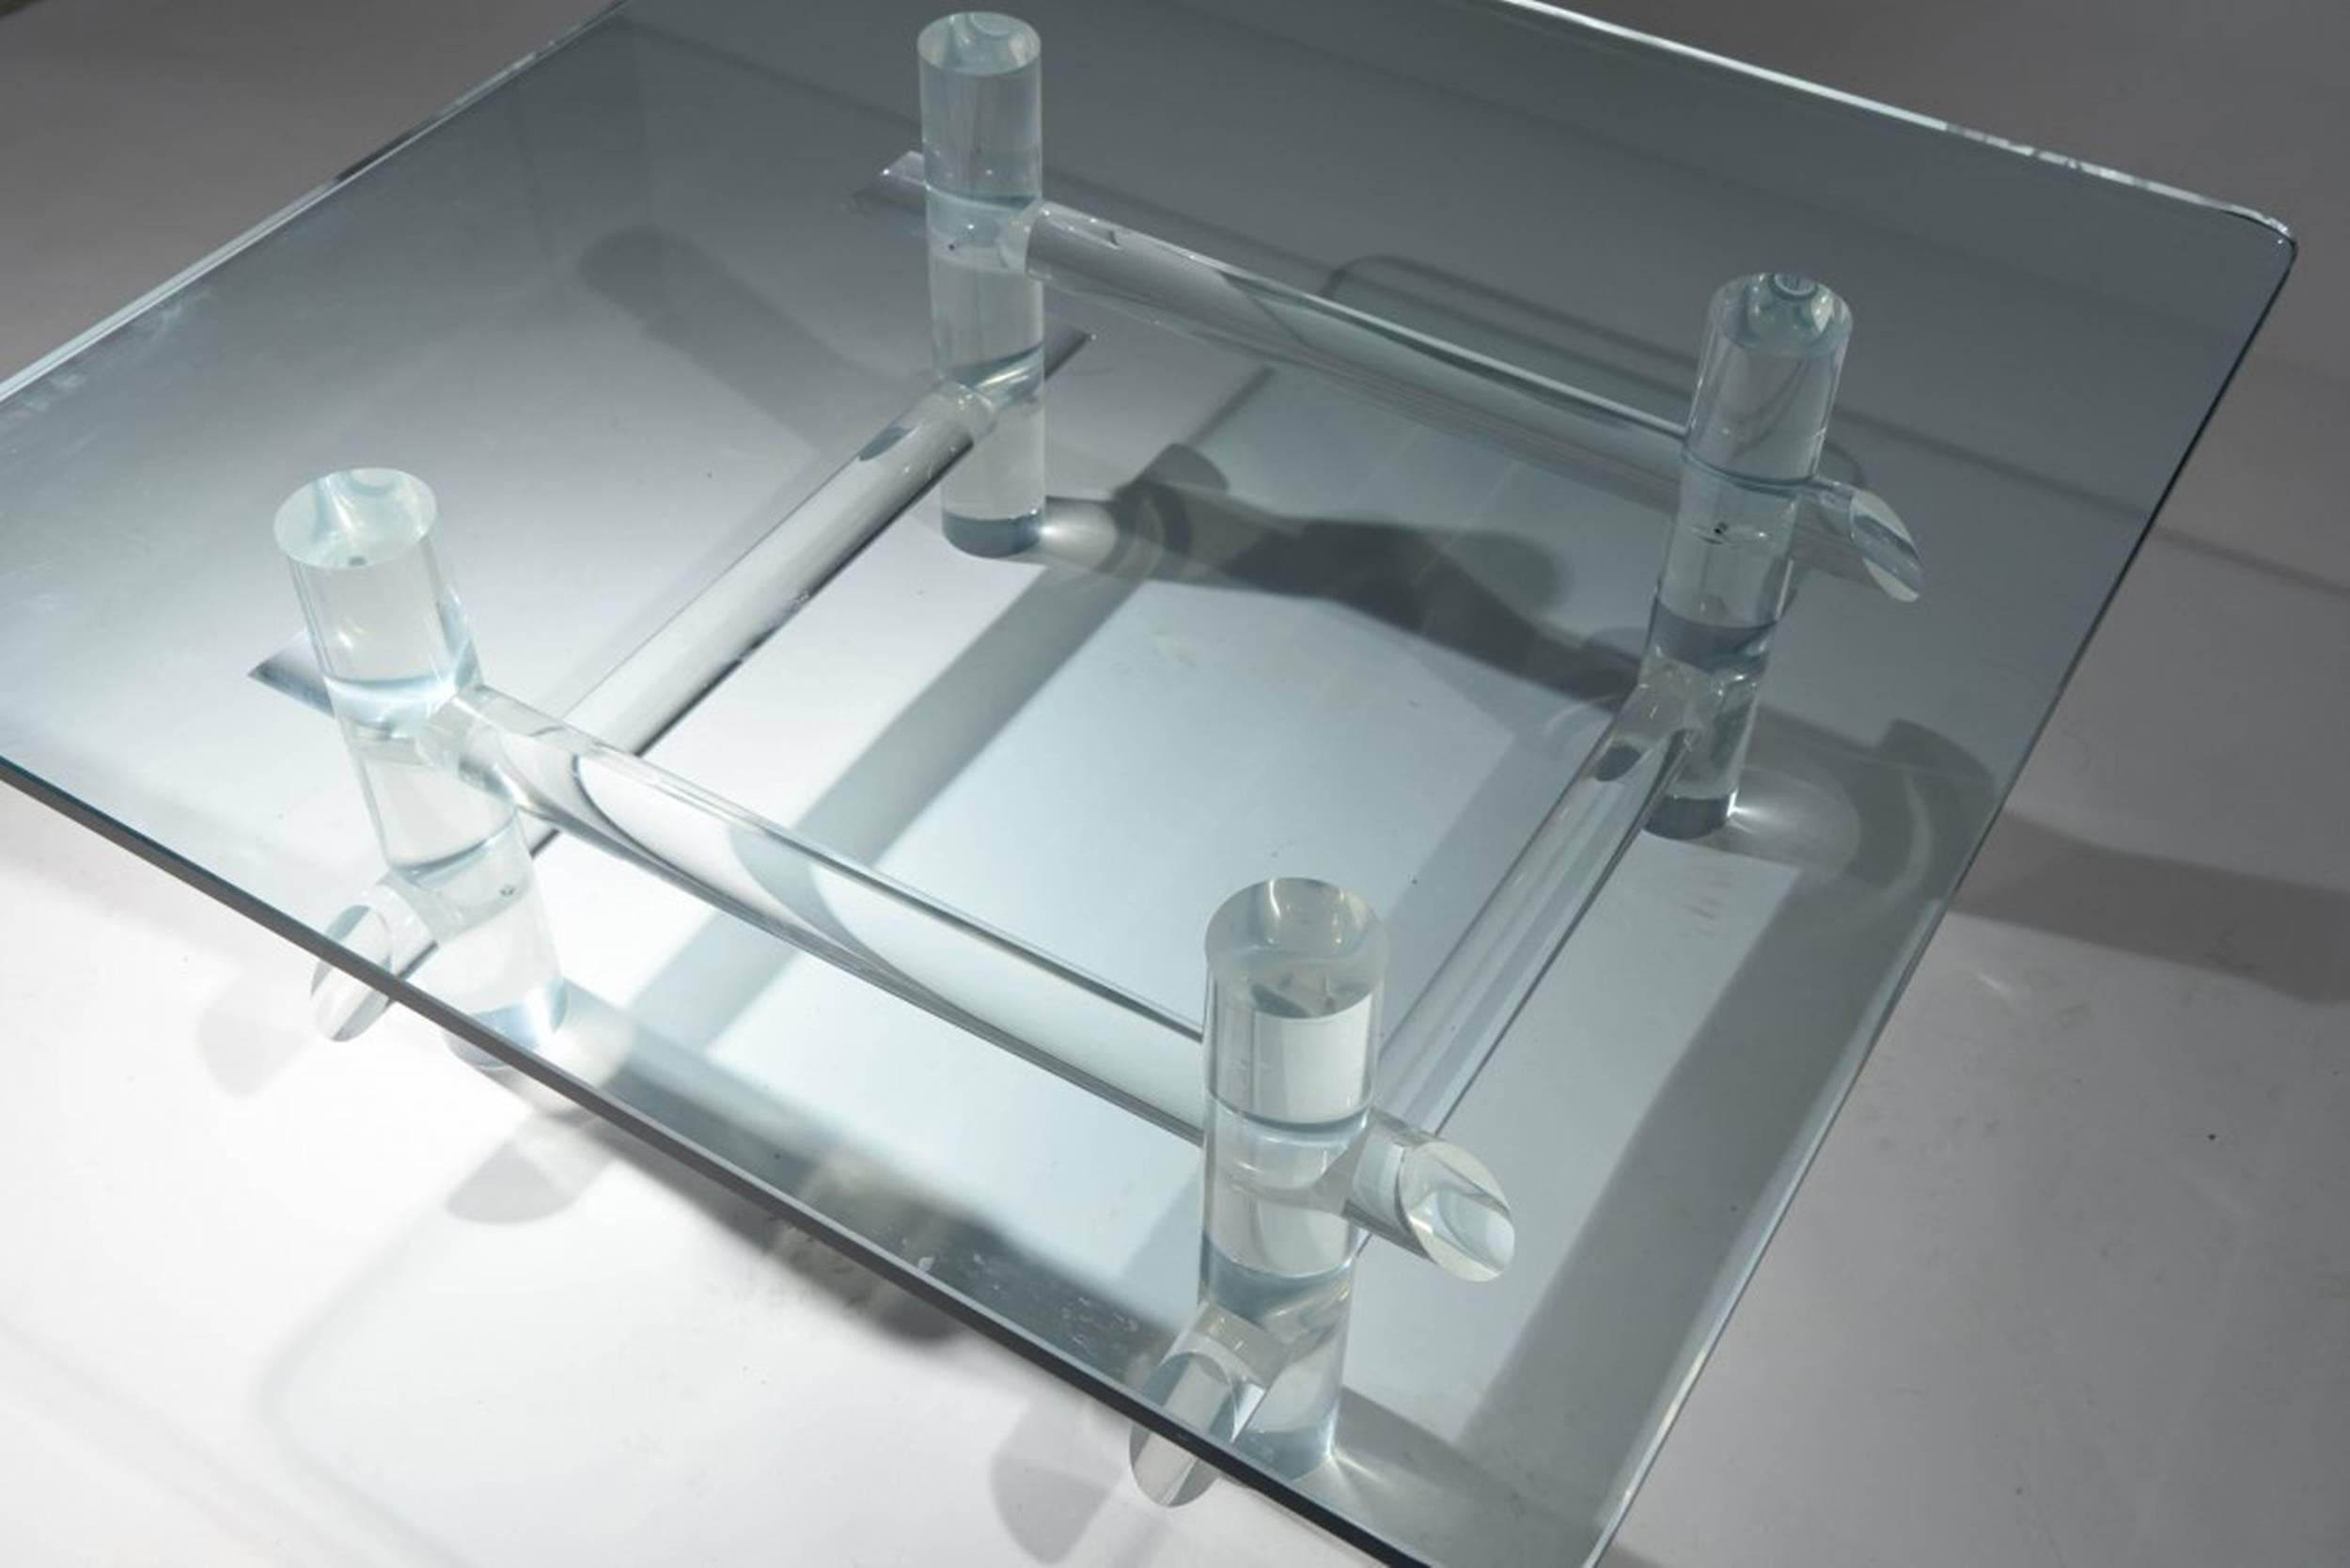 Stunning and whimsical coffee table designed and manufactured in France by Les Prismatiques.
The table has a very minimalist look, the thick Lucite rods can be removed and put closer together of further apart which is great if you wish to